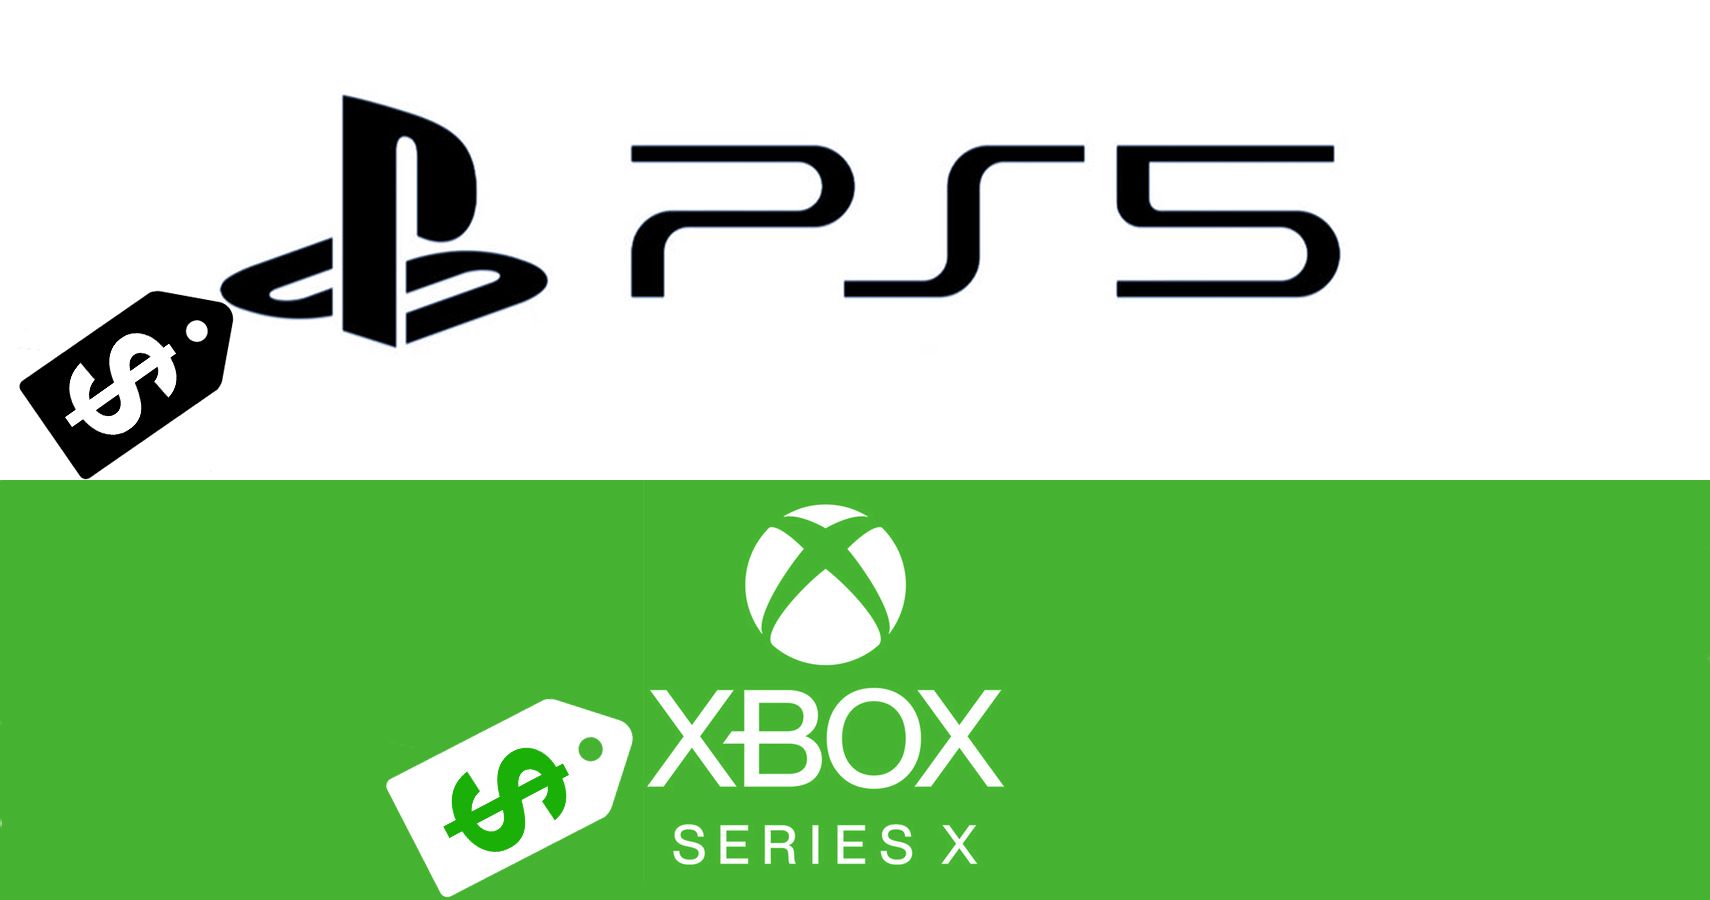 Playstation 5 and Xbox Series X logos side by side with price tags next to names